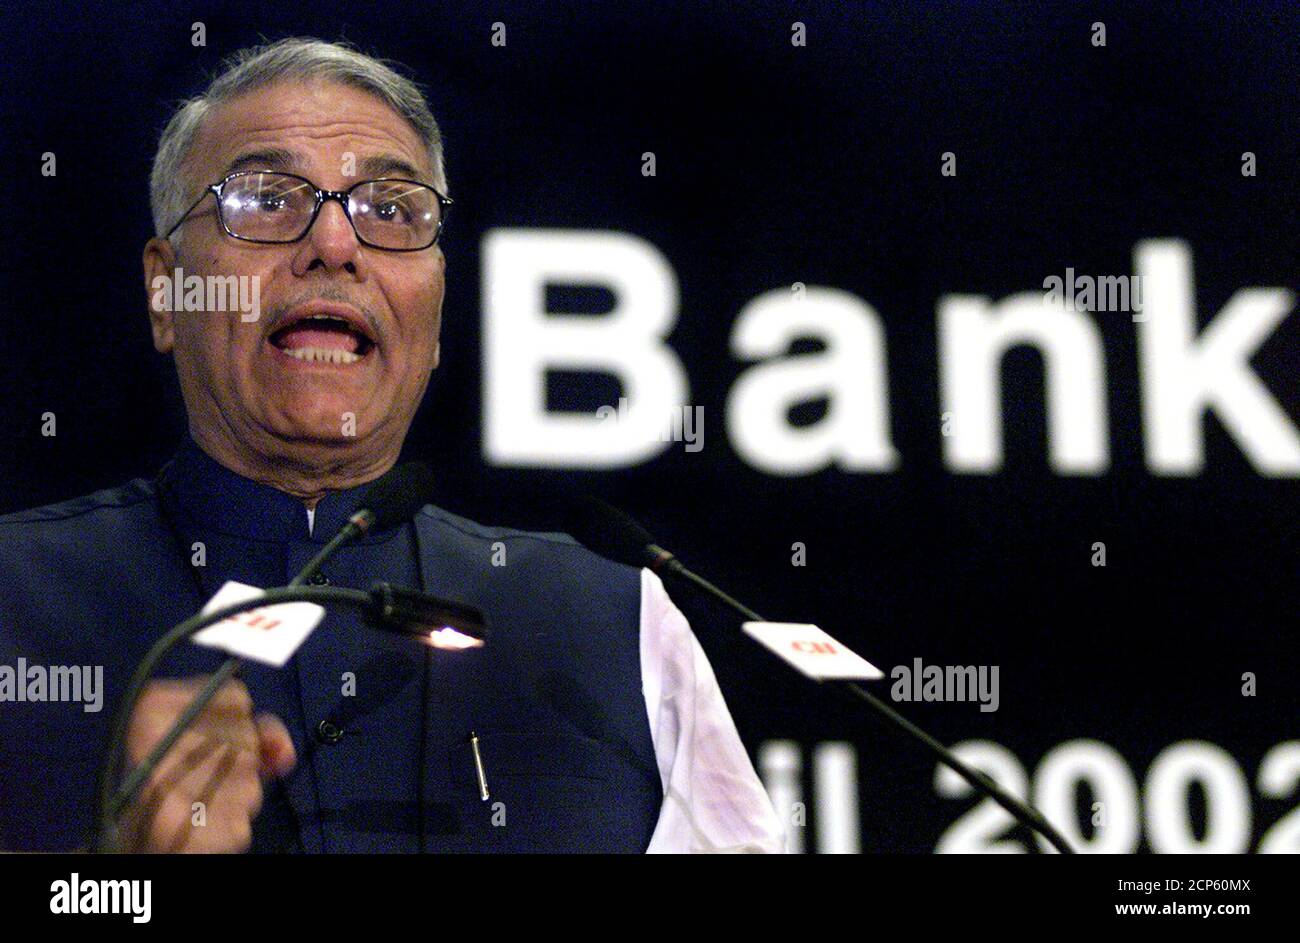 Indian Finance Minister Yashwant Sinha speaks during the inaugural session of 'Banking Summit 2002' organised by the Confederation of Indian Industries (CII) in Bombay April 1, 2002. Sinha expressed his optimism about the Indian economy expecting an upswing and also said that he expects the interest rates to stay soft. REUTERS/Arko Datta  AD/CP Stock Photo